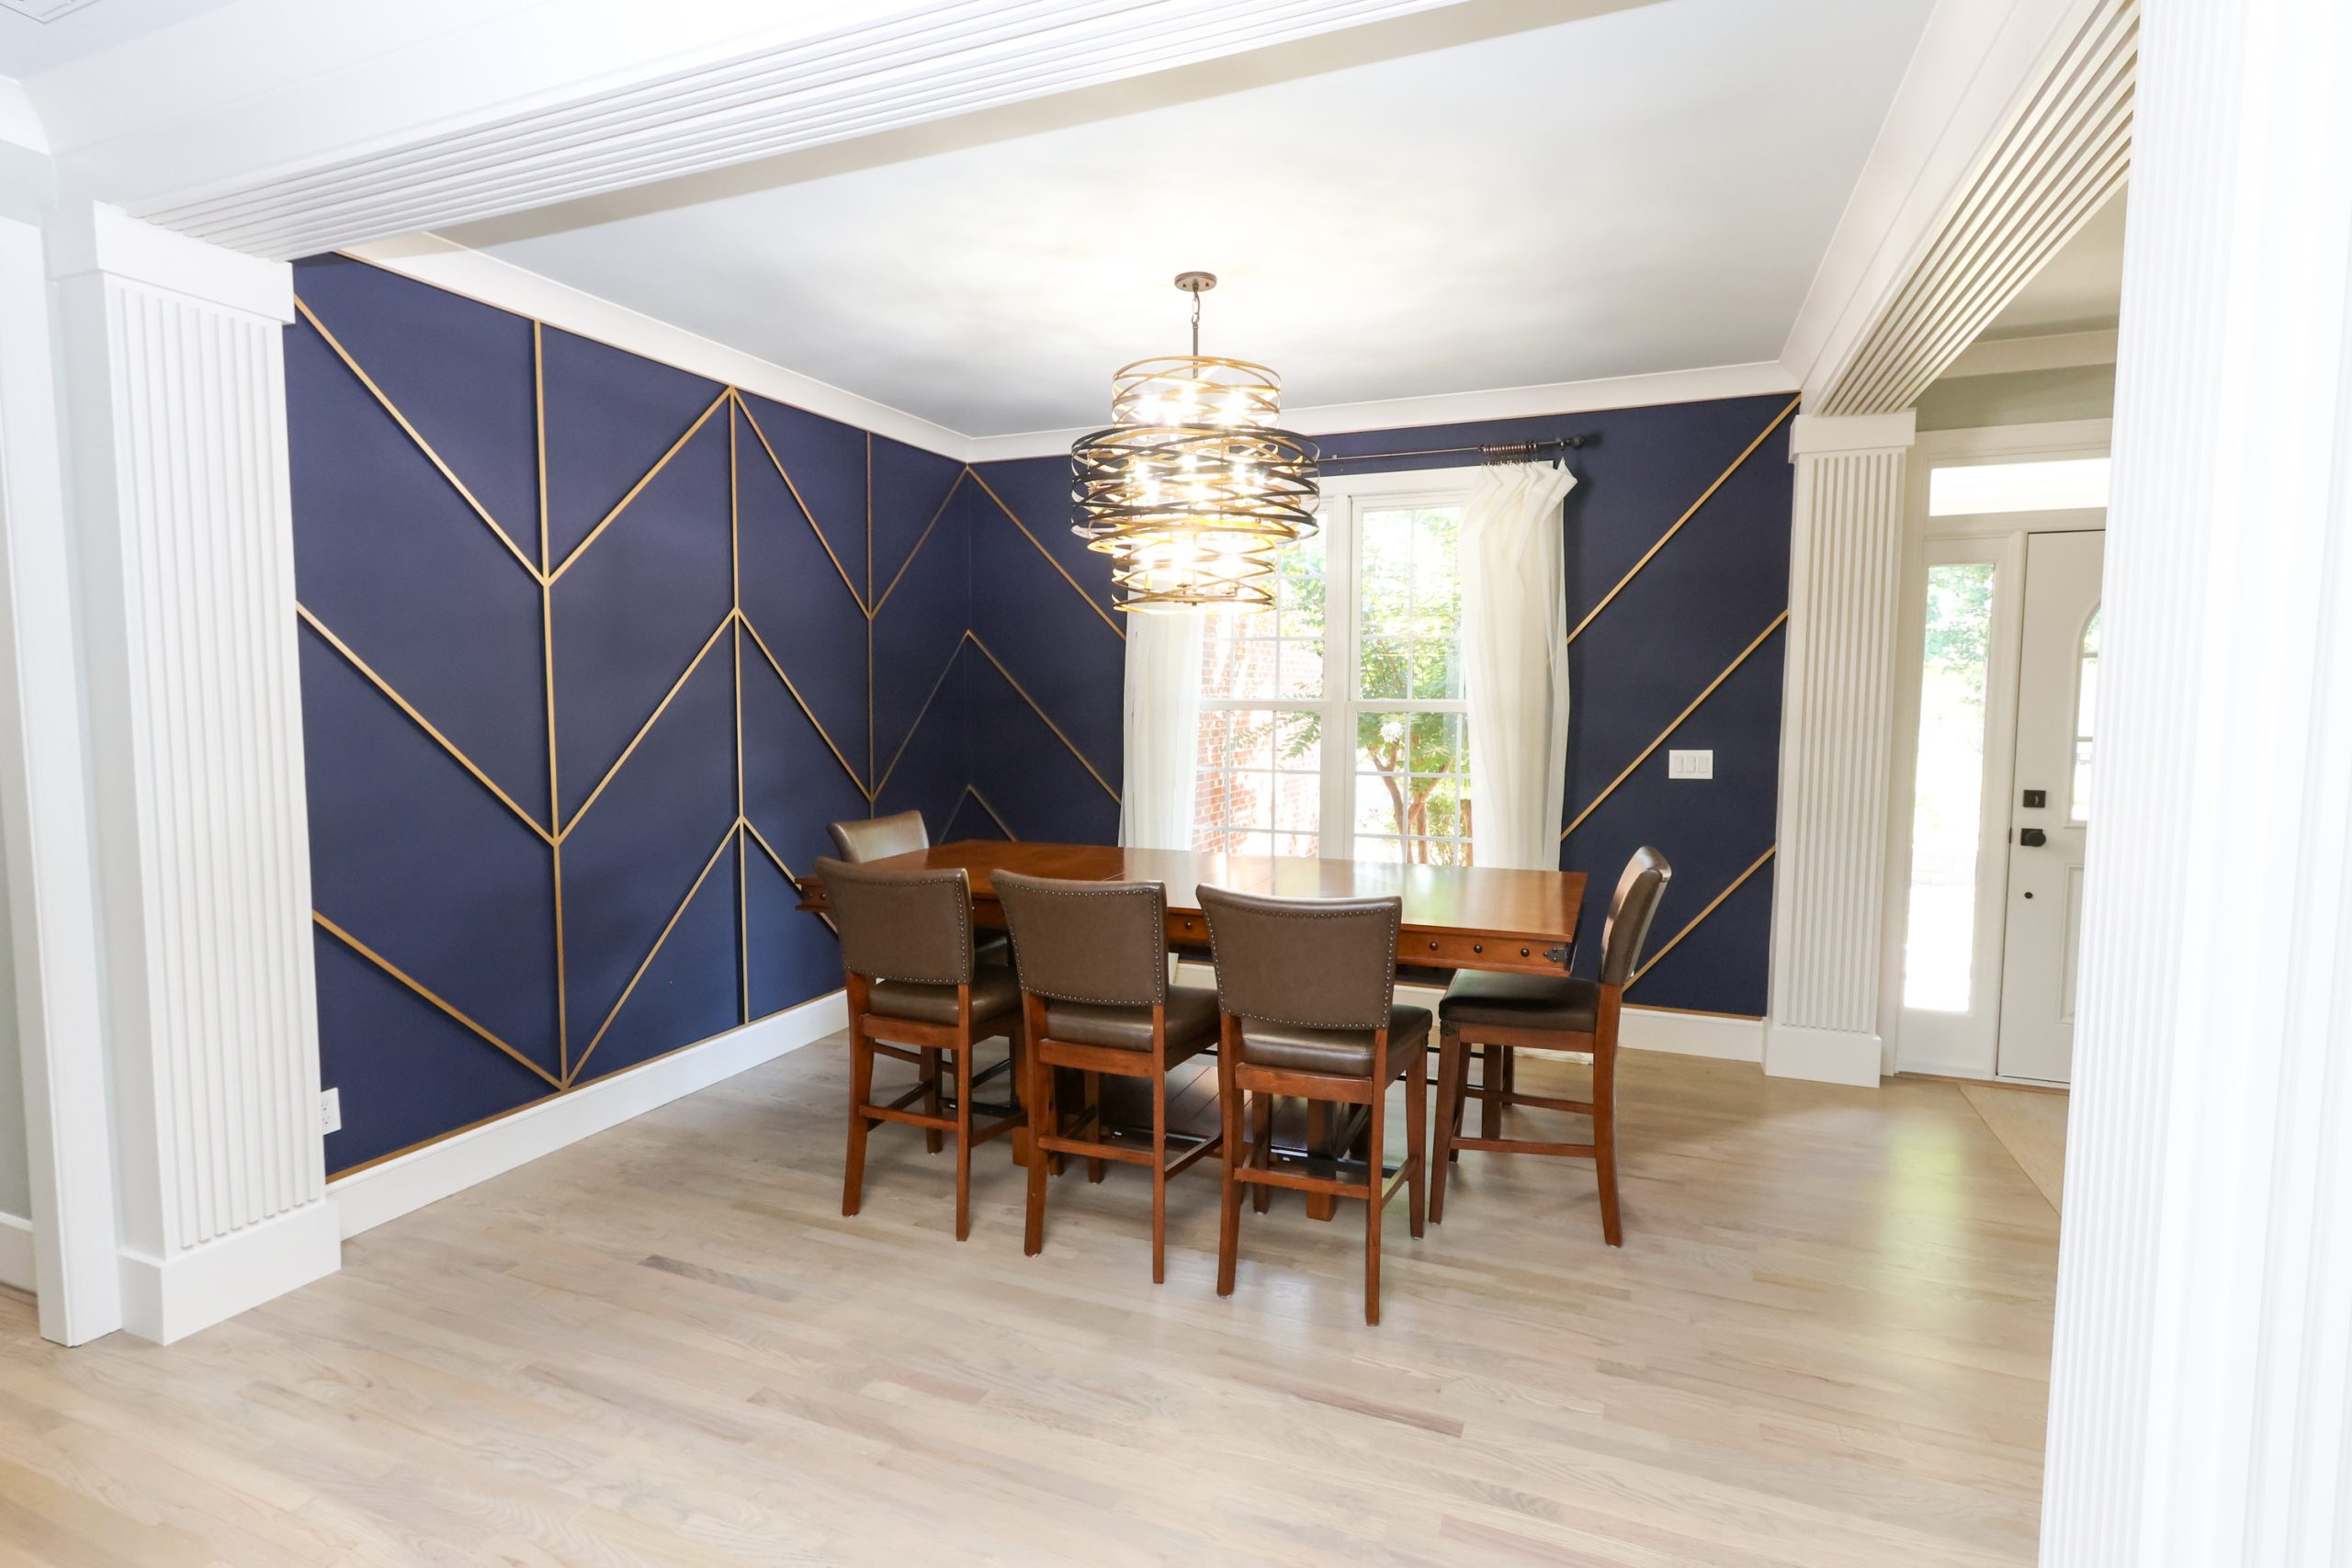 Dining room update by Riverbirch of Raleigh